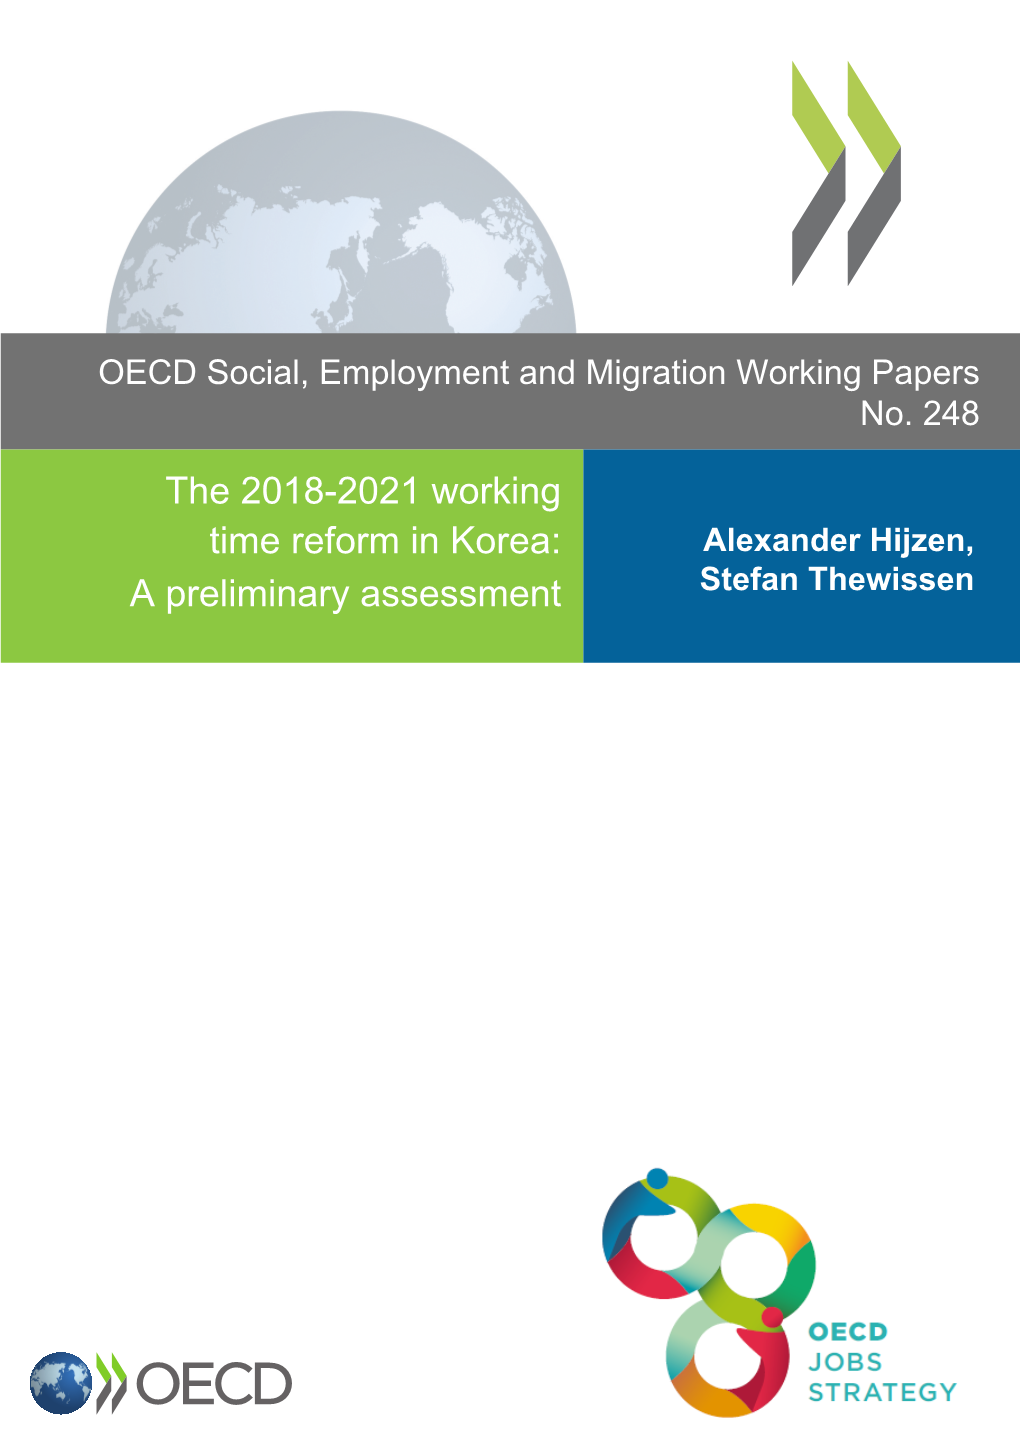 The 2018-2021 Working Time Reform in Korea: a Preliminary Assessment